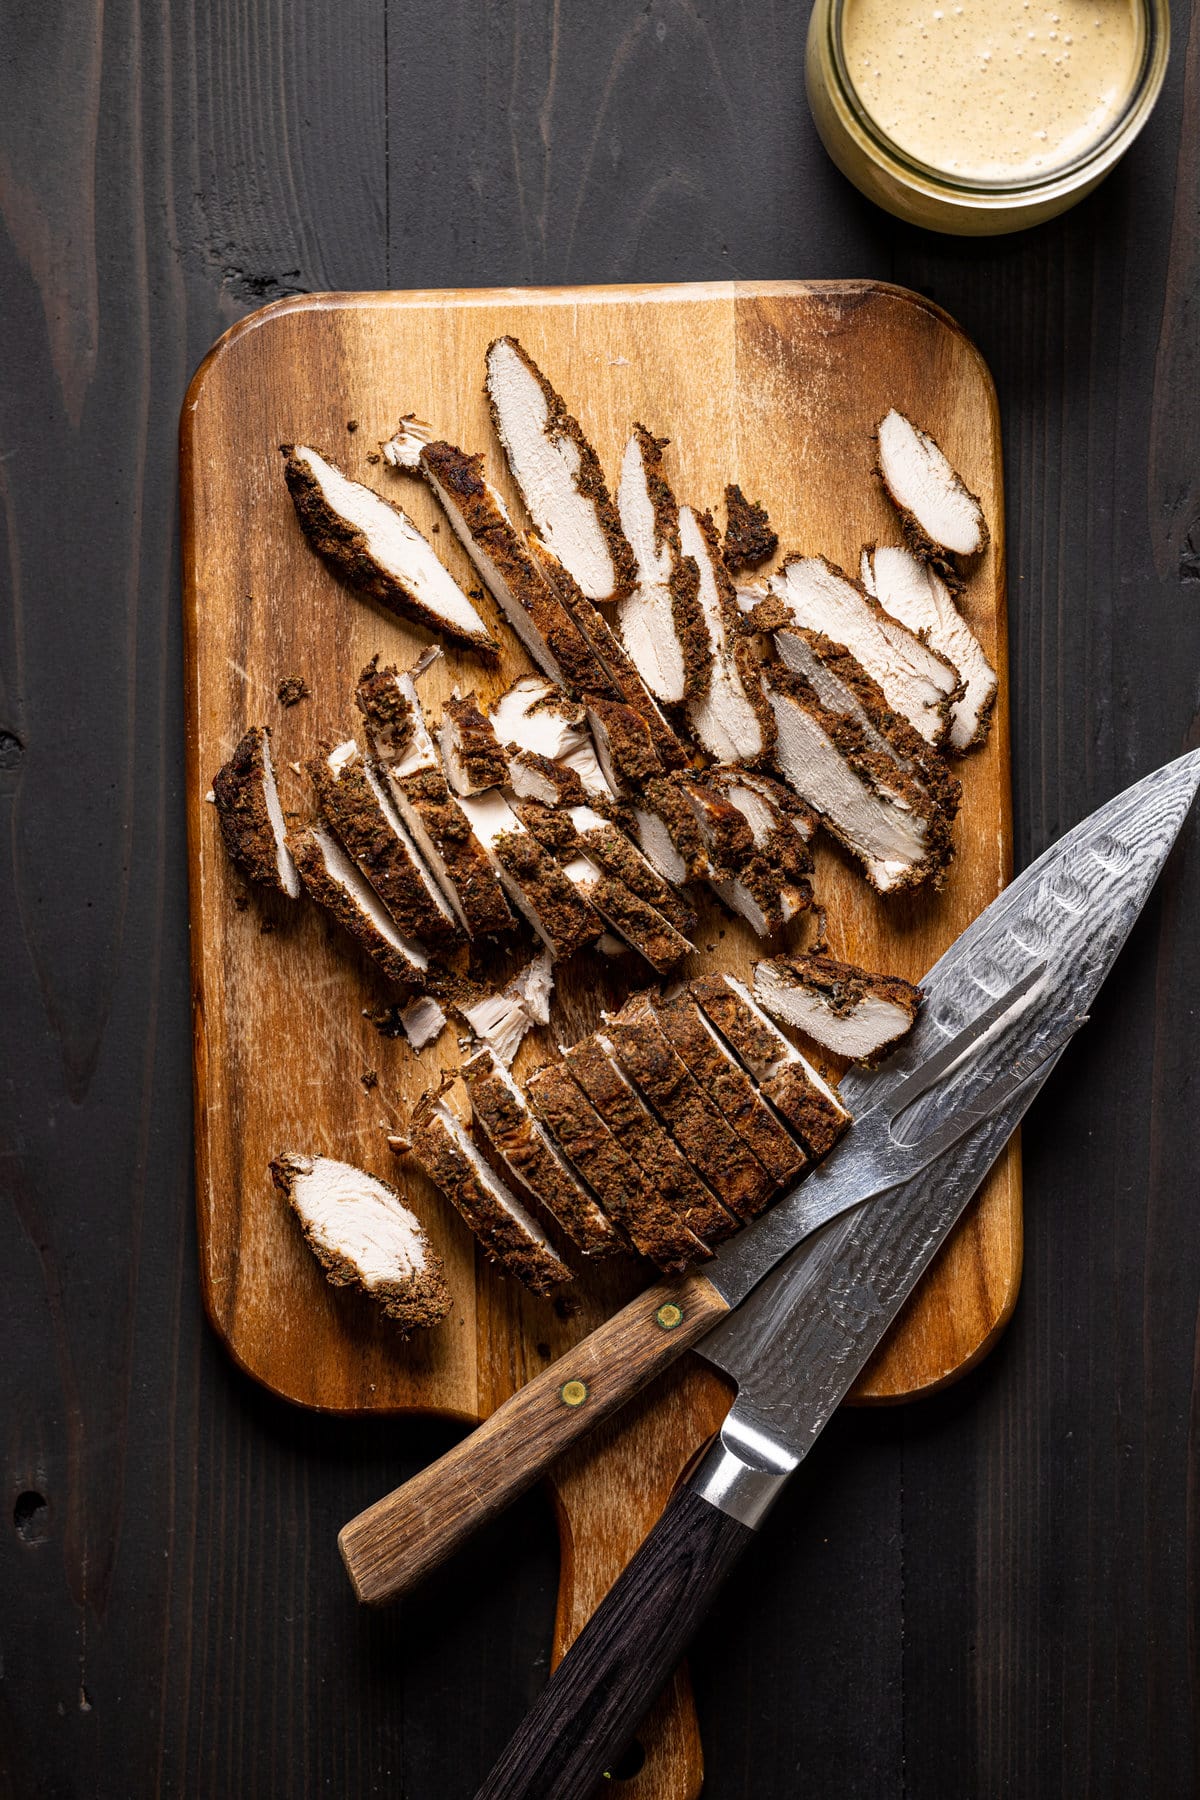 Sliced jerk chicken on a cutting board with a knife and two-pronged fork